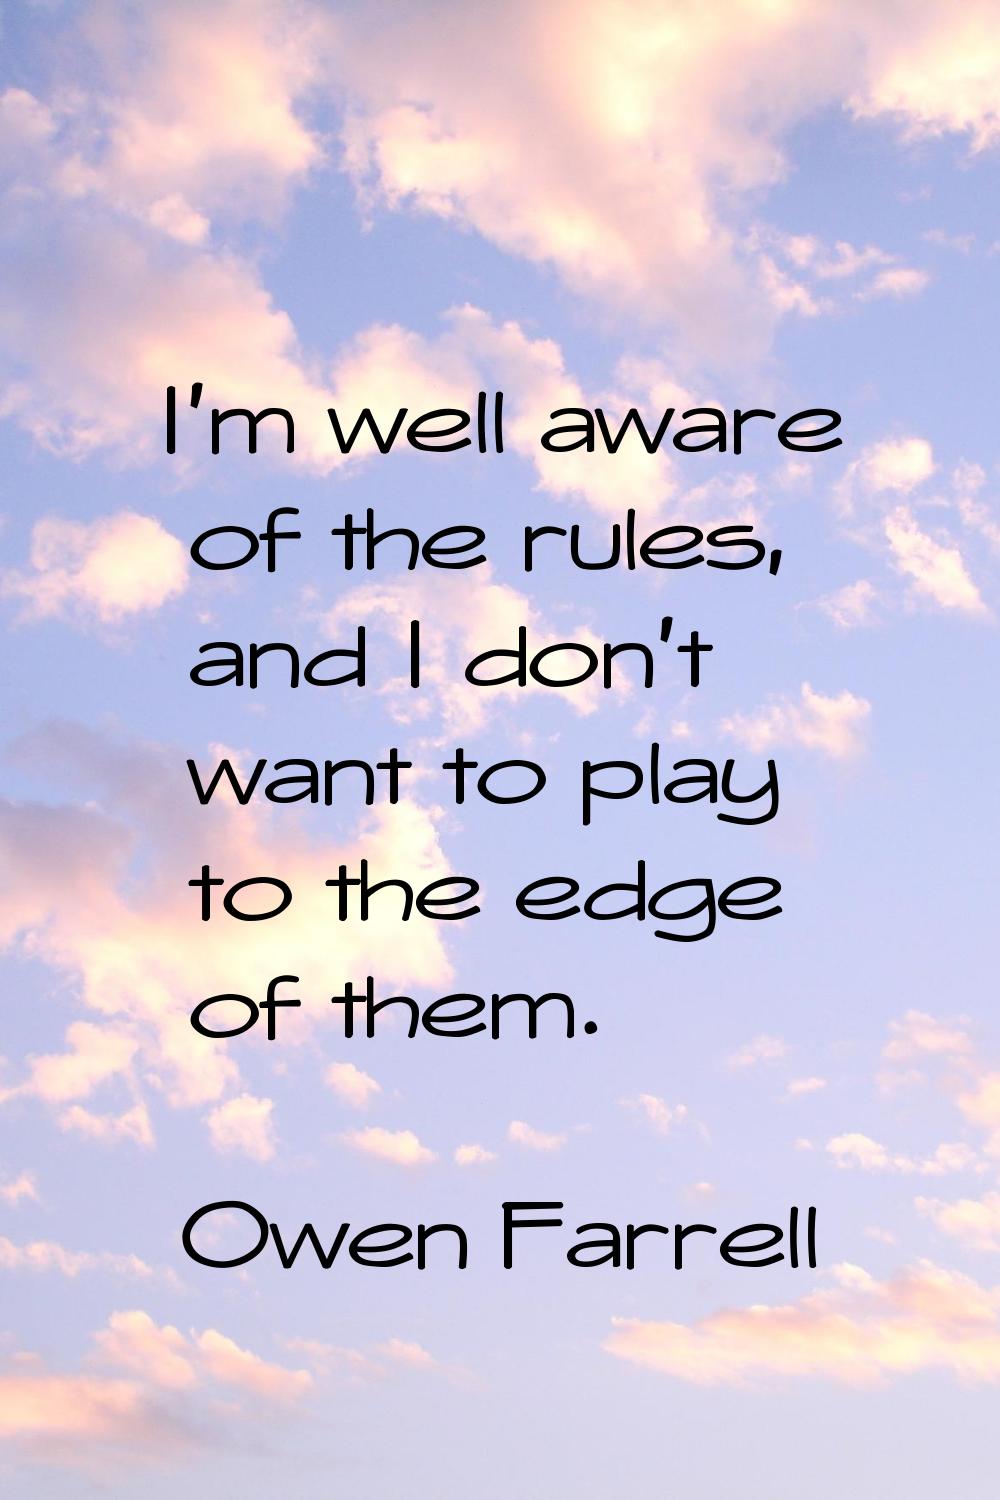 I'm well aware of the rules, and I don't want to play to the edge of them.